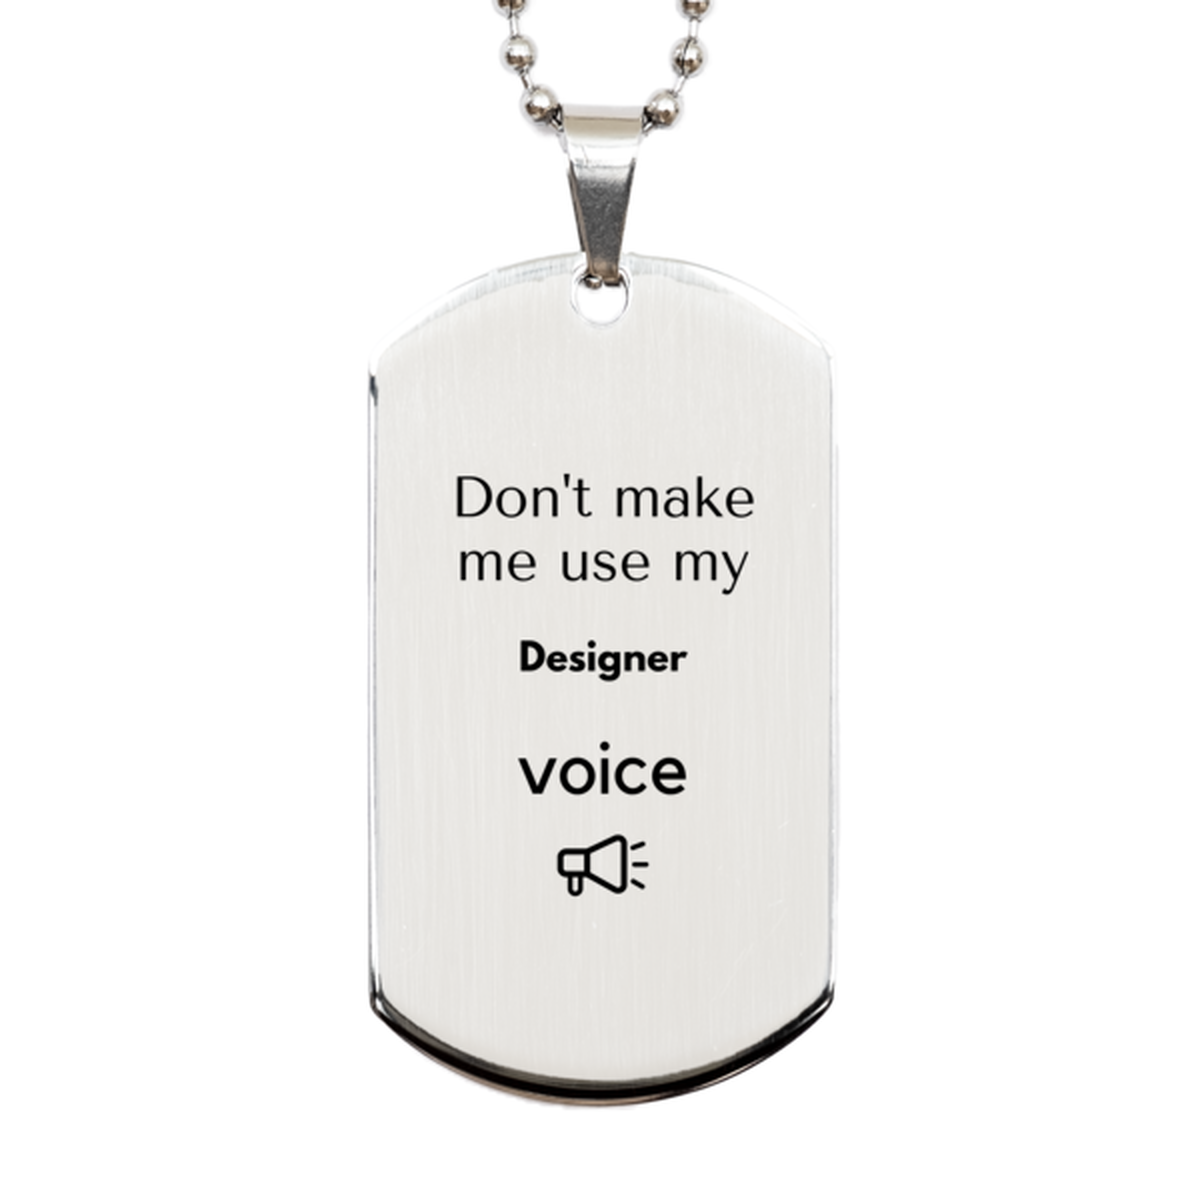 Don't make me use my Designer voice, Sarcasm Designer Gifts, Christmas Designer Silver Dog Tag Birthday Unique Gifts For Designer Coworkers, Men, Women, Colleague, Friends